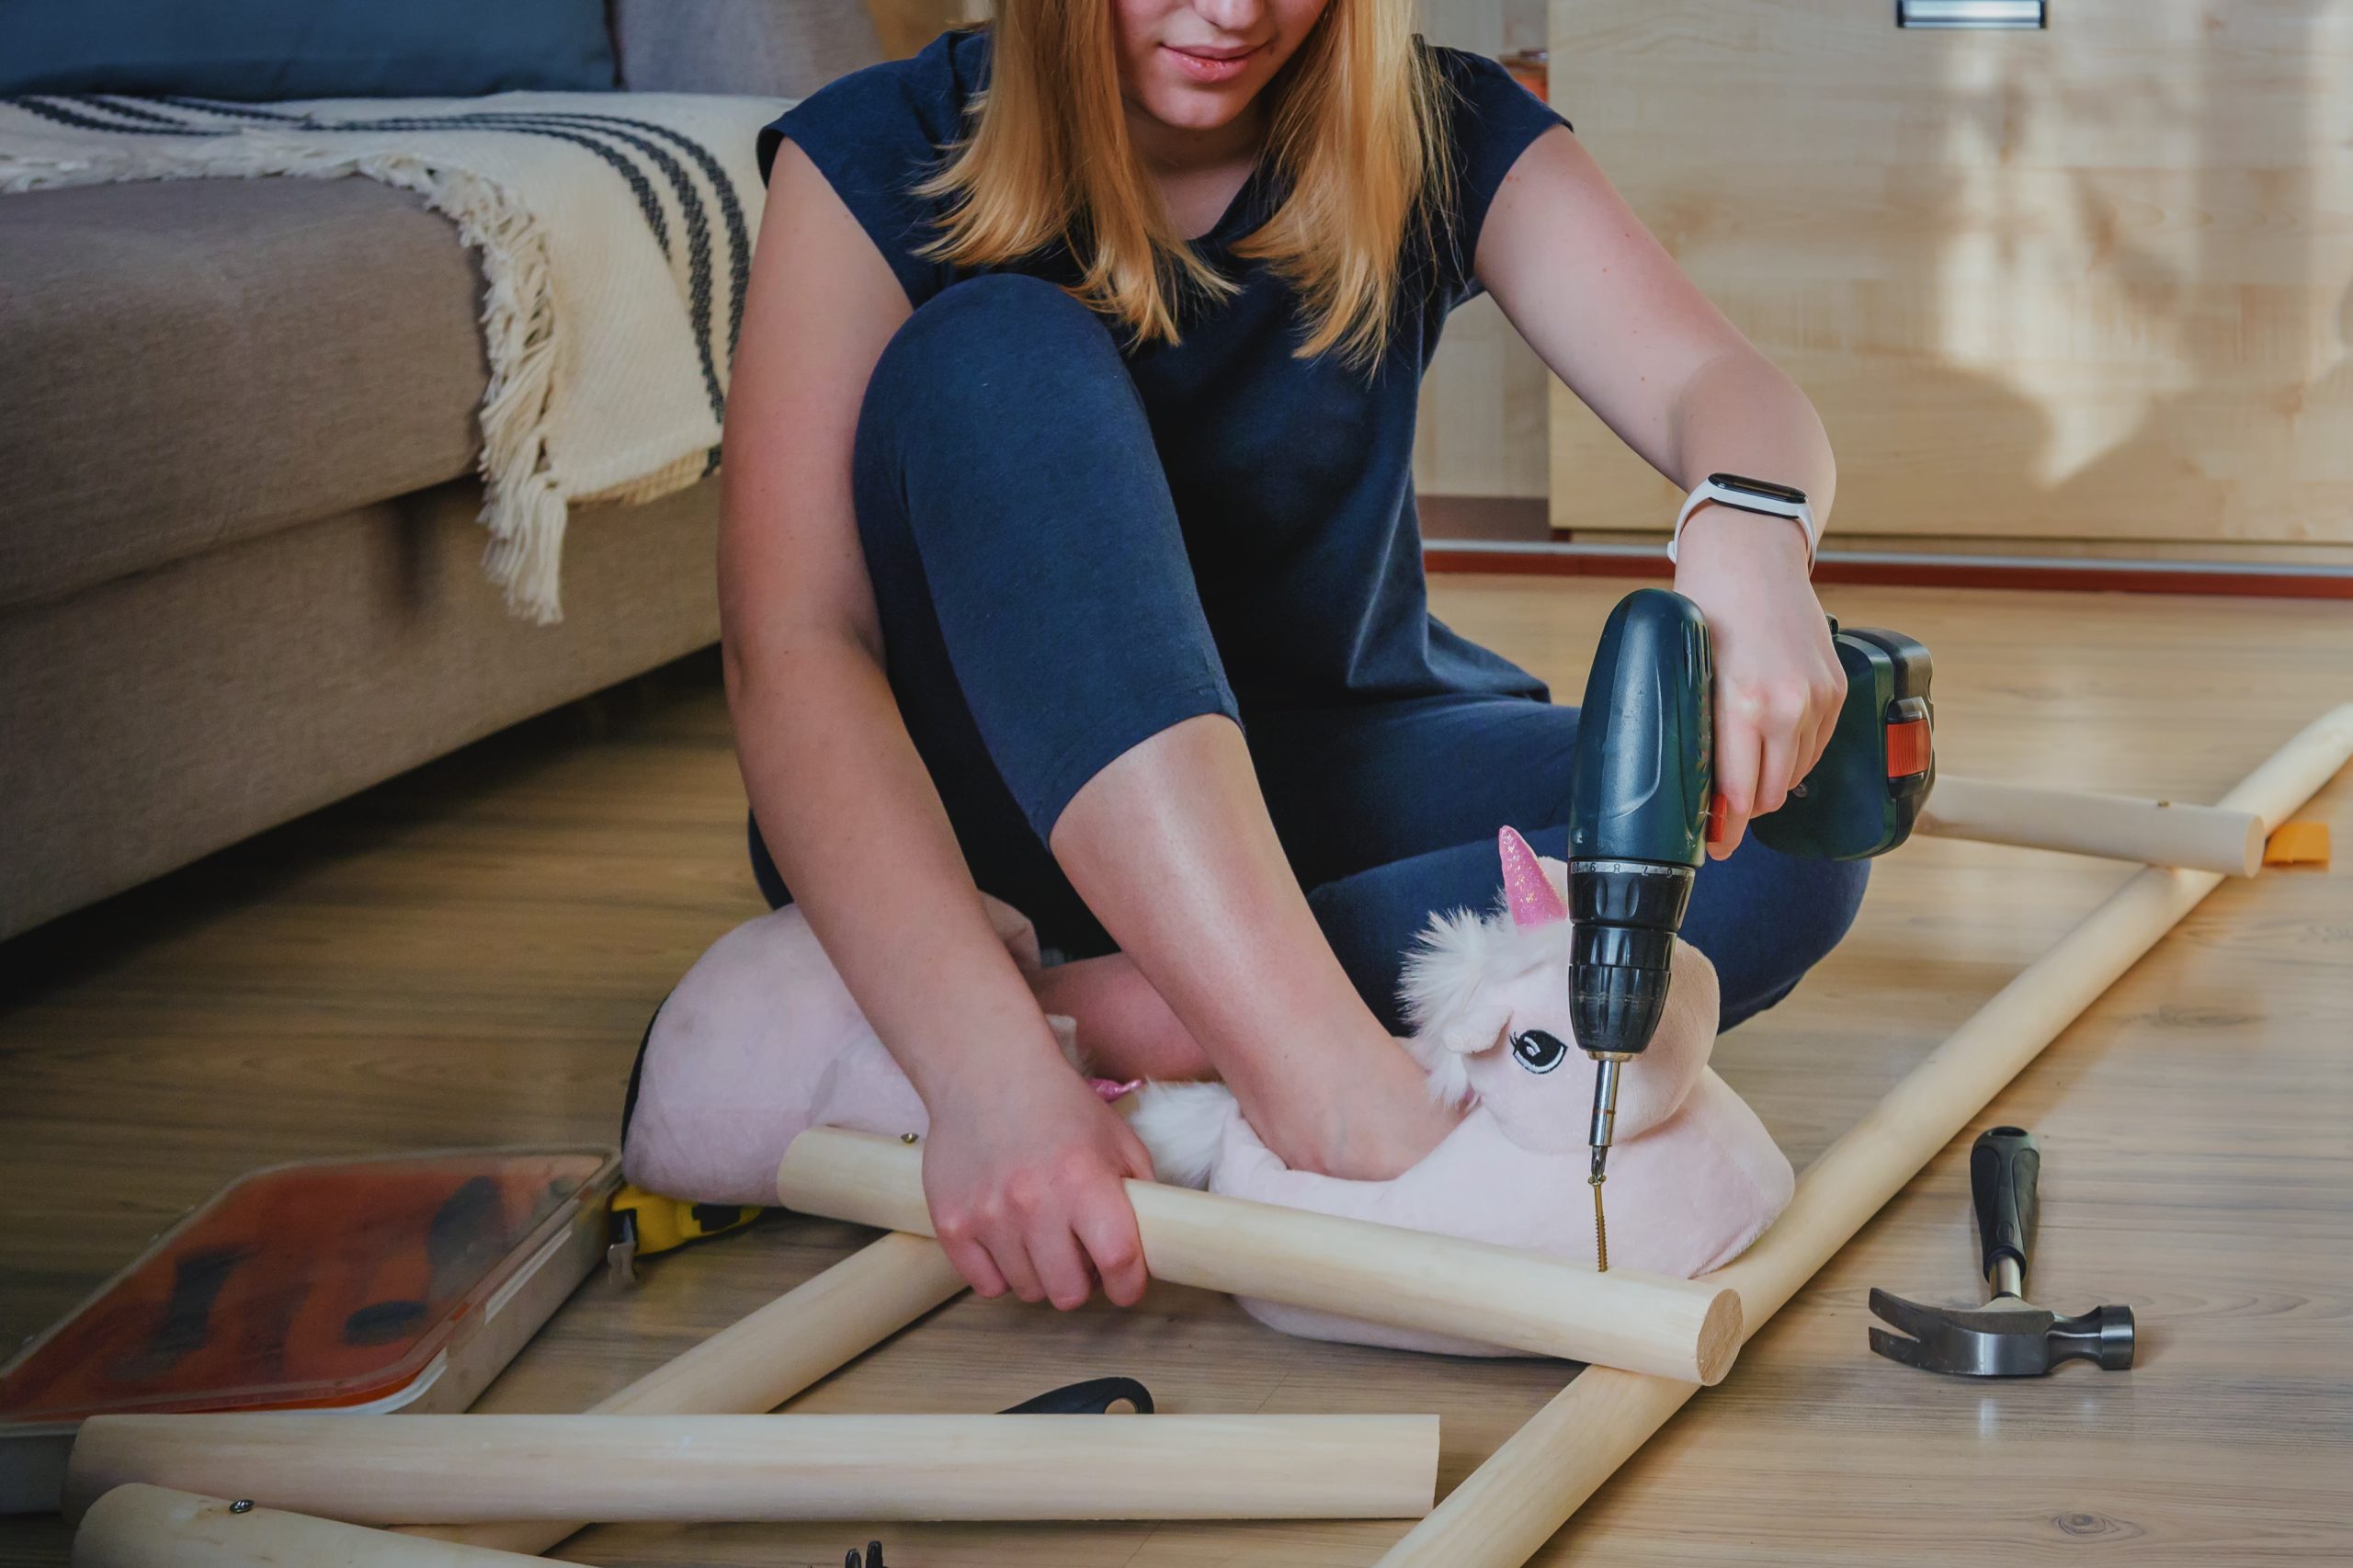 Gender Equality Feminism Girl Working With Hammer Screwdrivers At Home Handwork At Home Male Work Discrimination Creative Work Hobby.gender equality